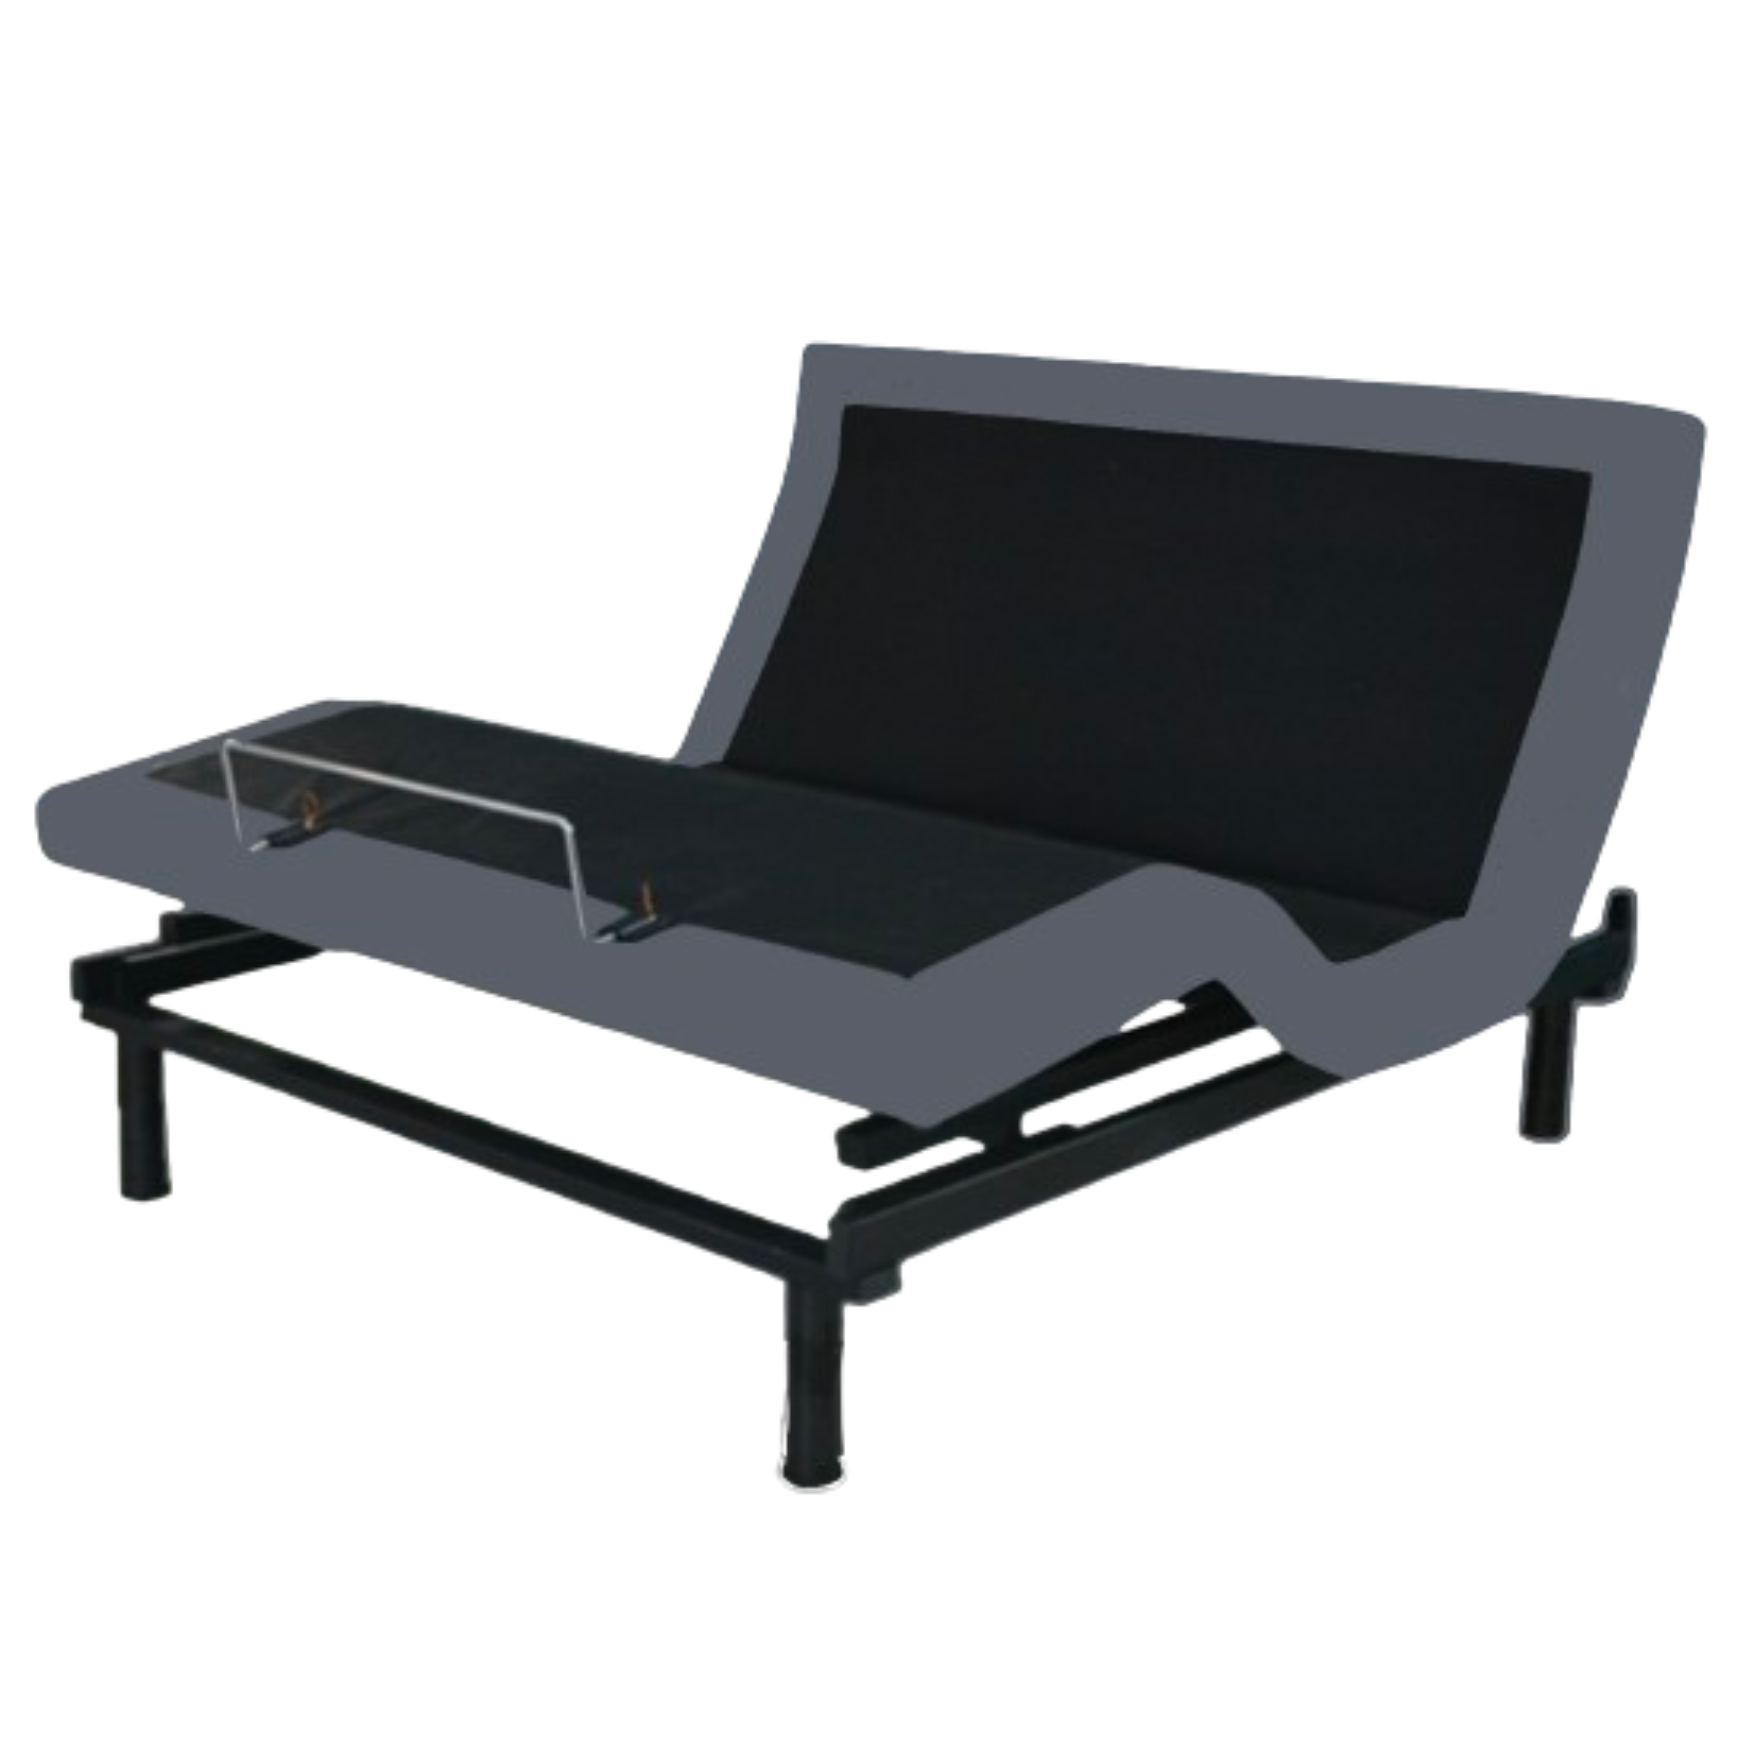 Transparent Posh Foldable bed pic.png